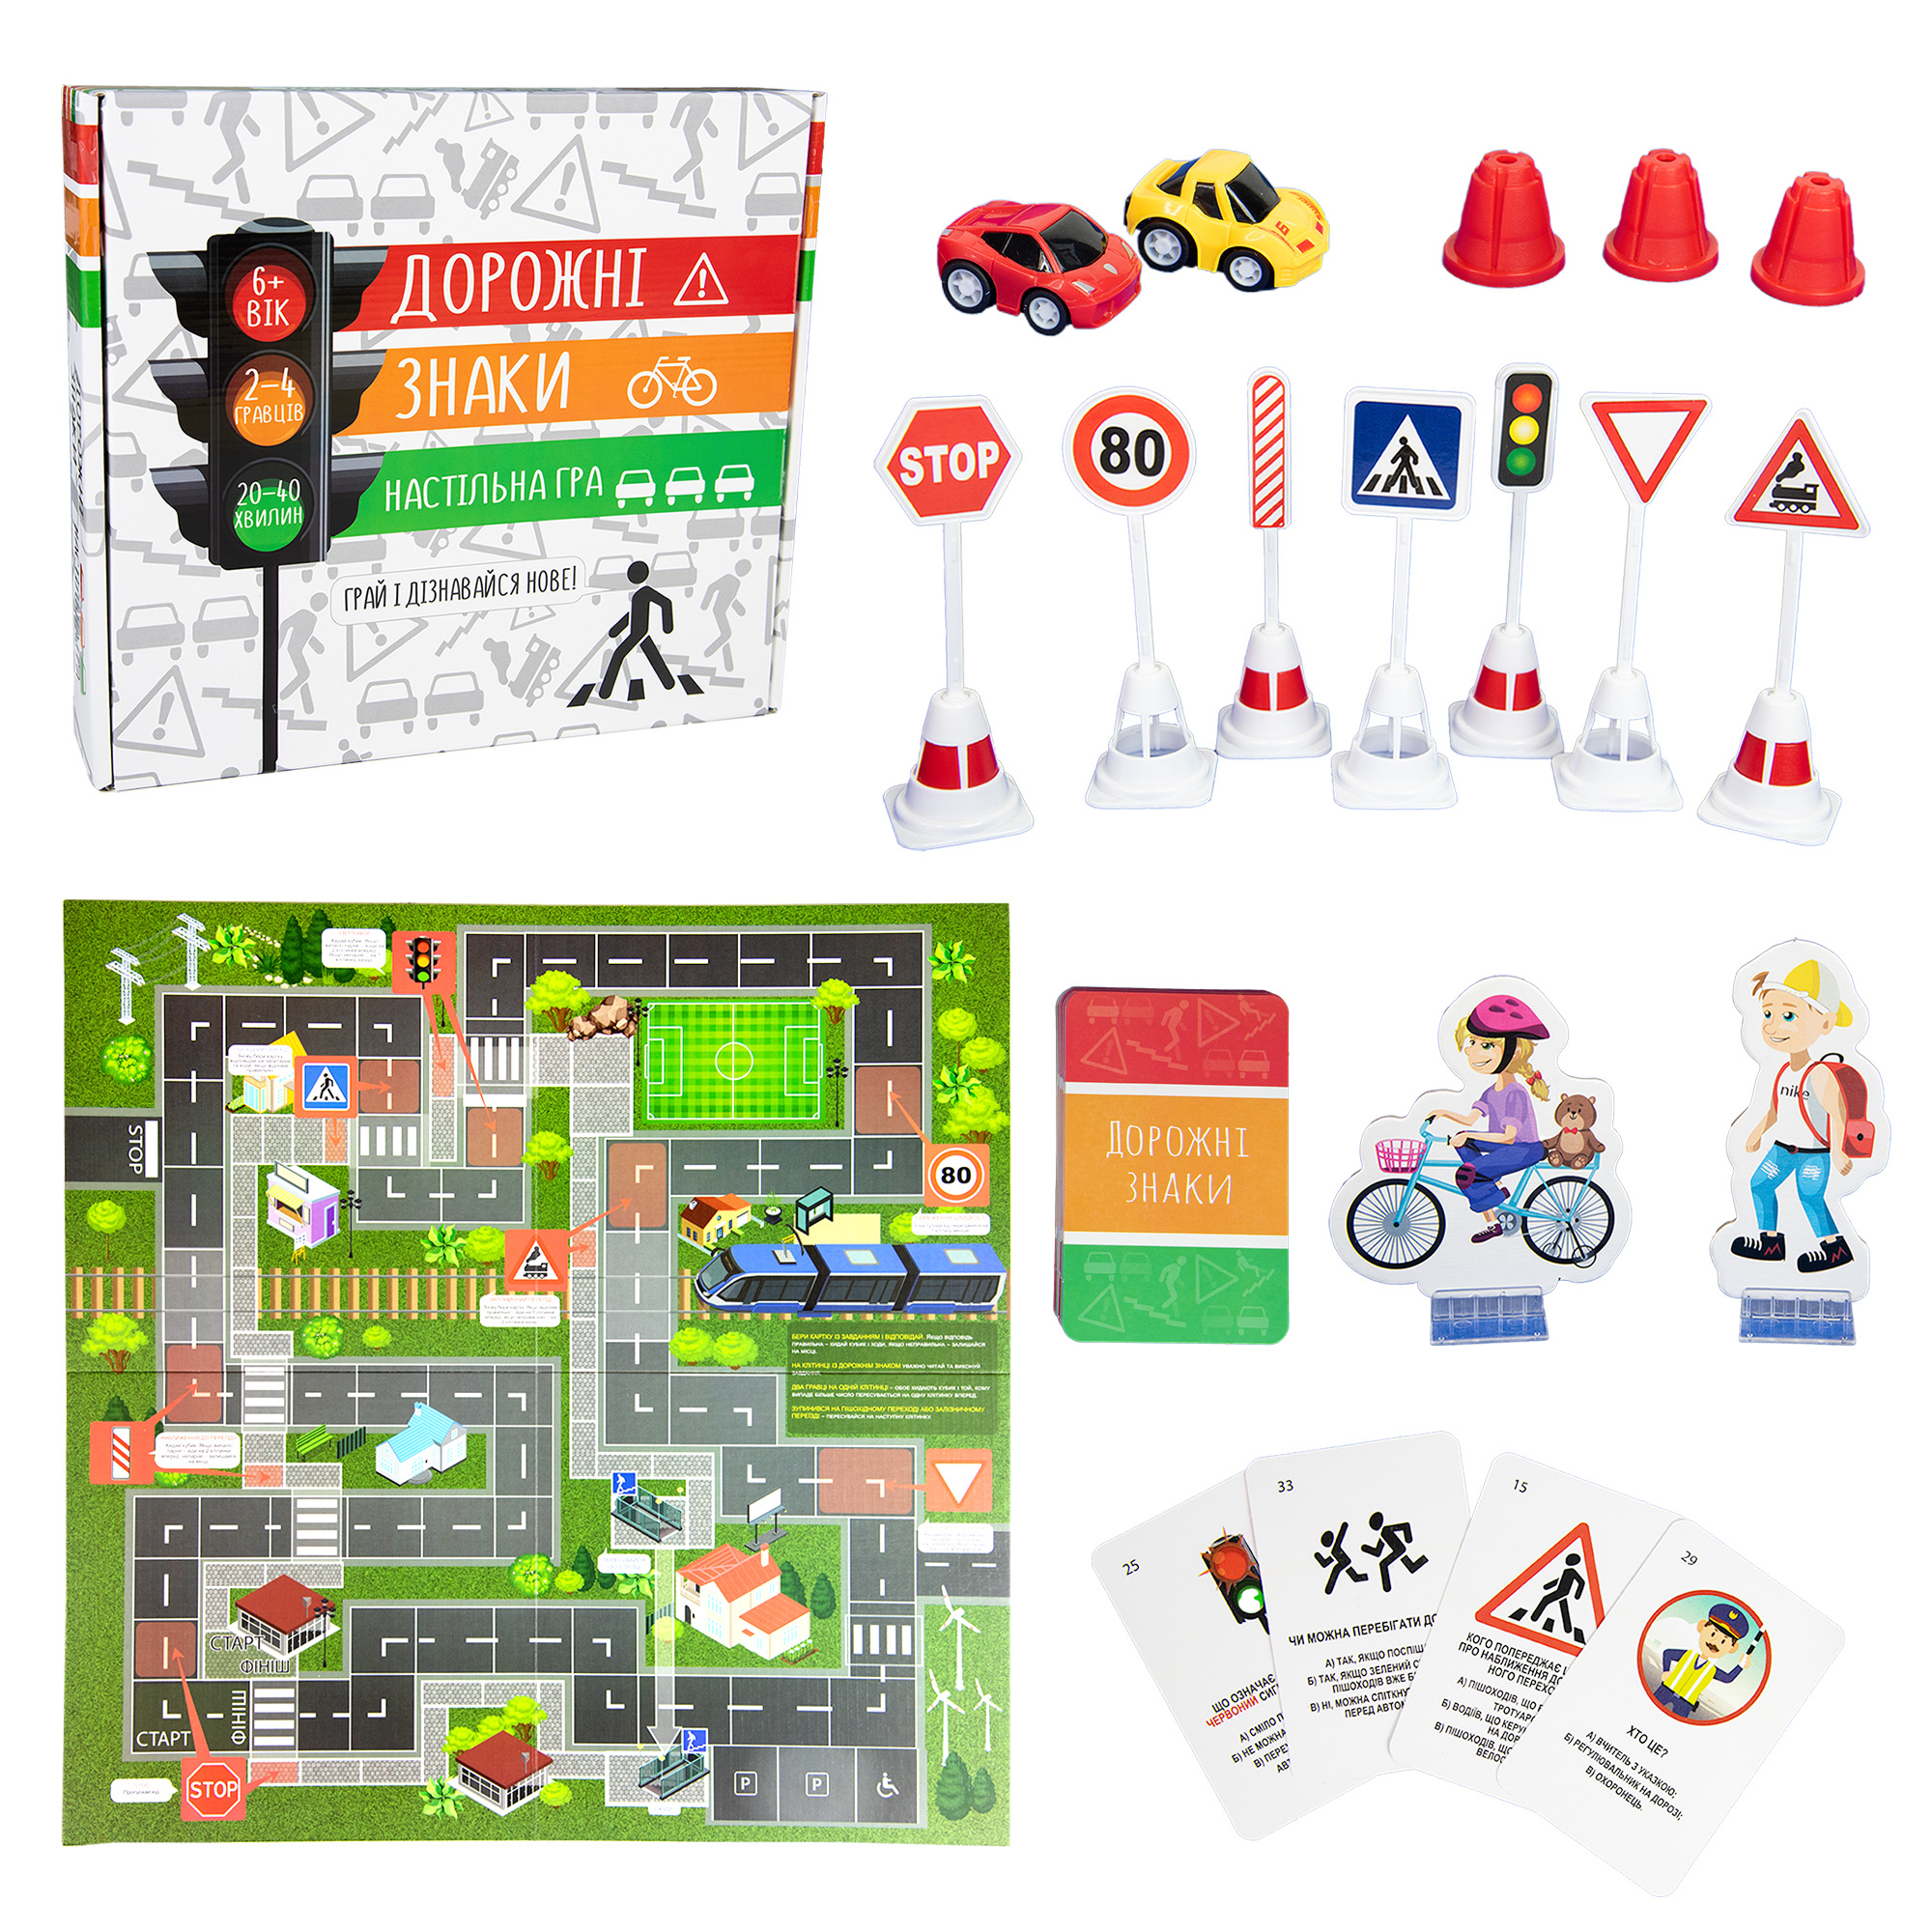 Board game Strateg Road signs 30245